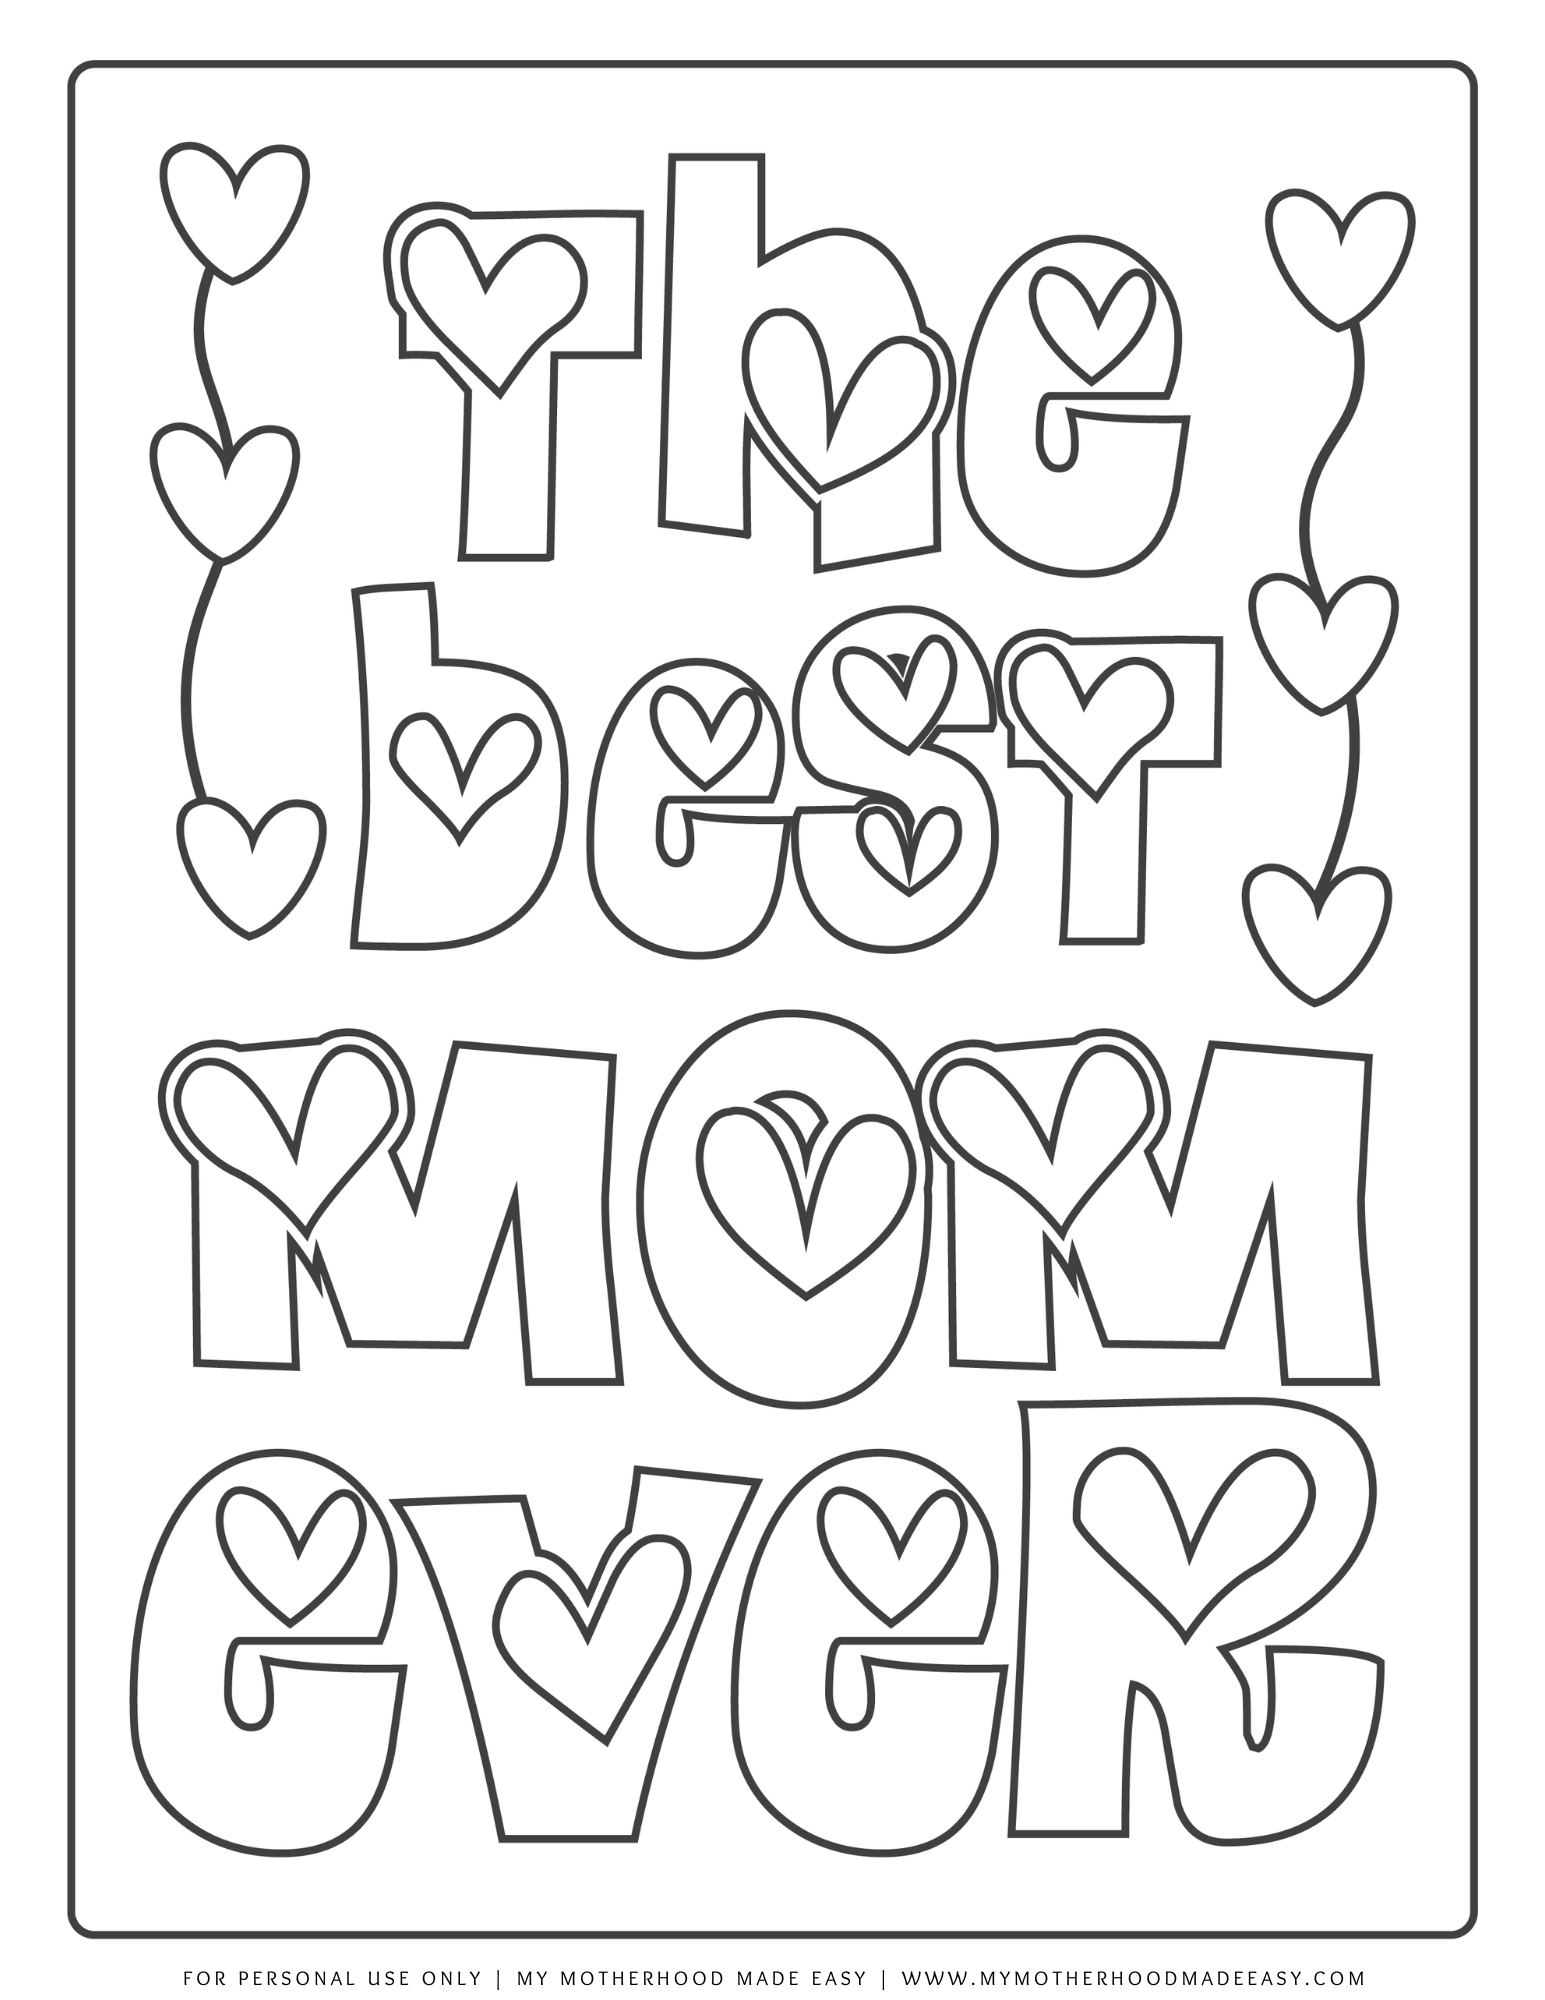 Mothers day coloring pages for kids